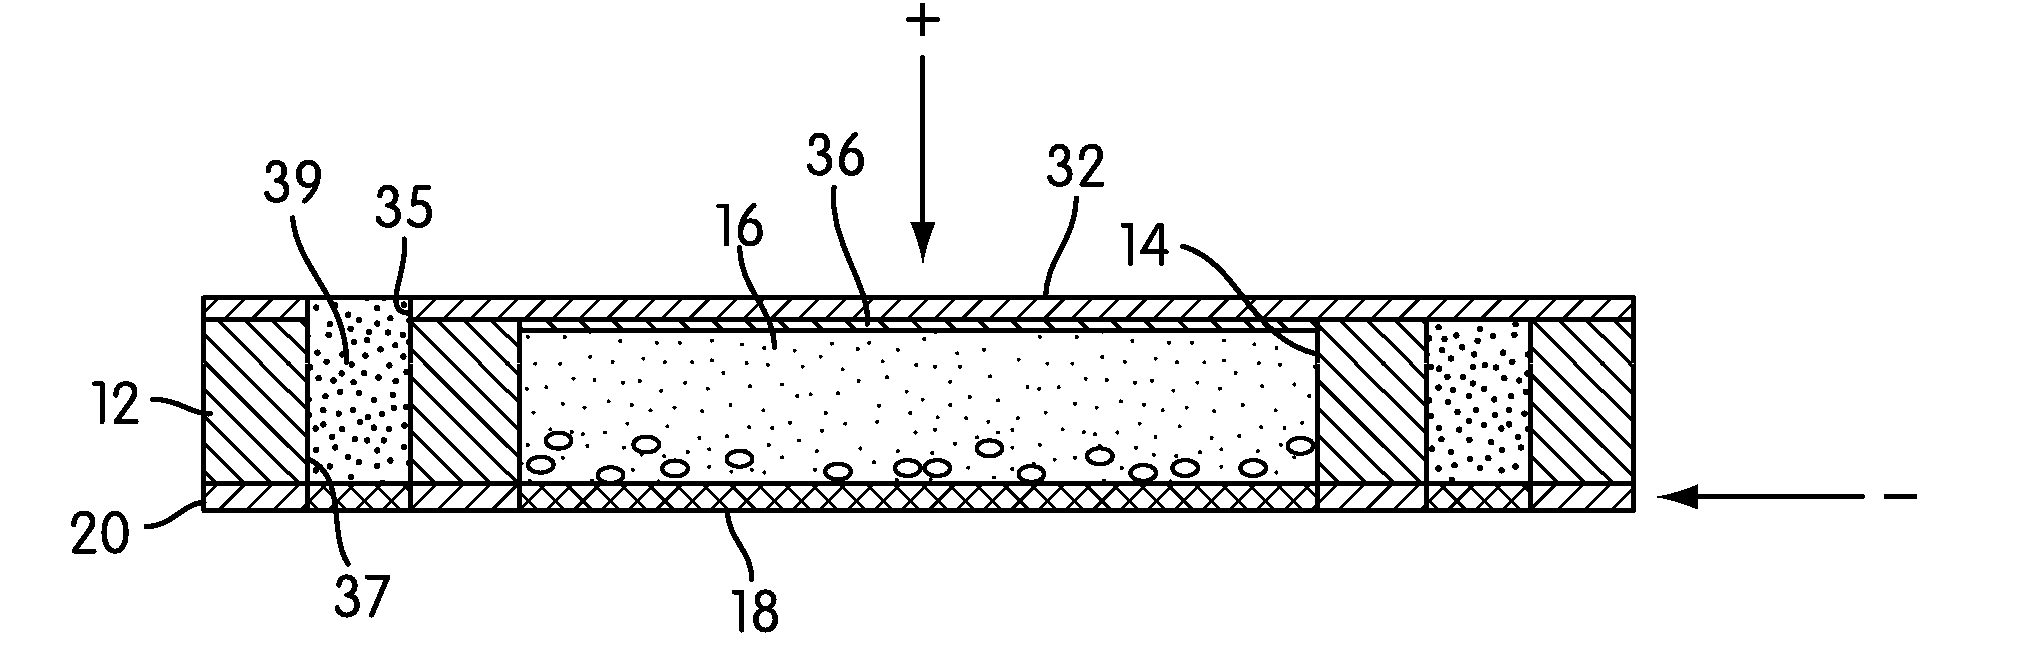 Iontophoretic device with improved counterelectrode